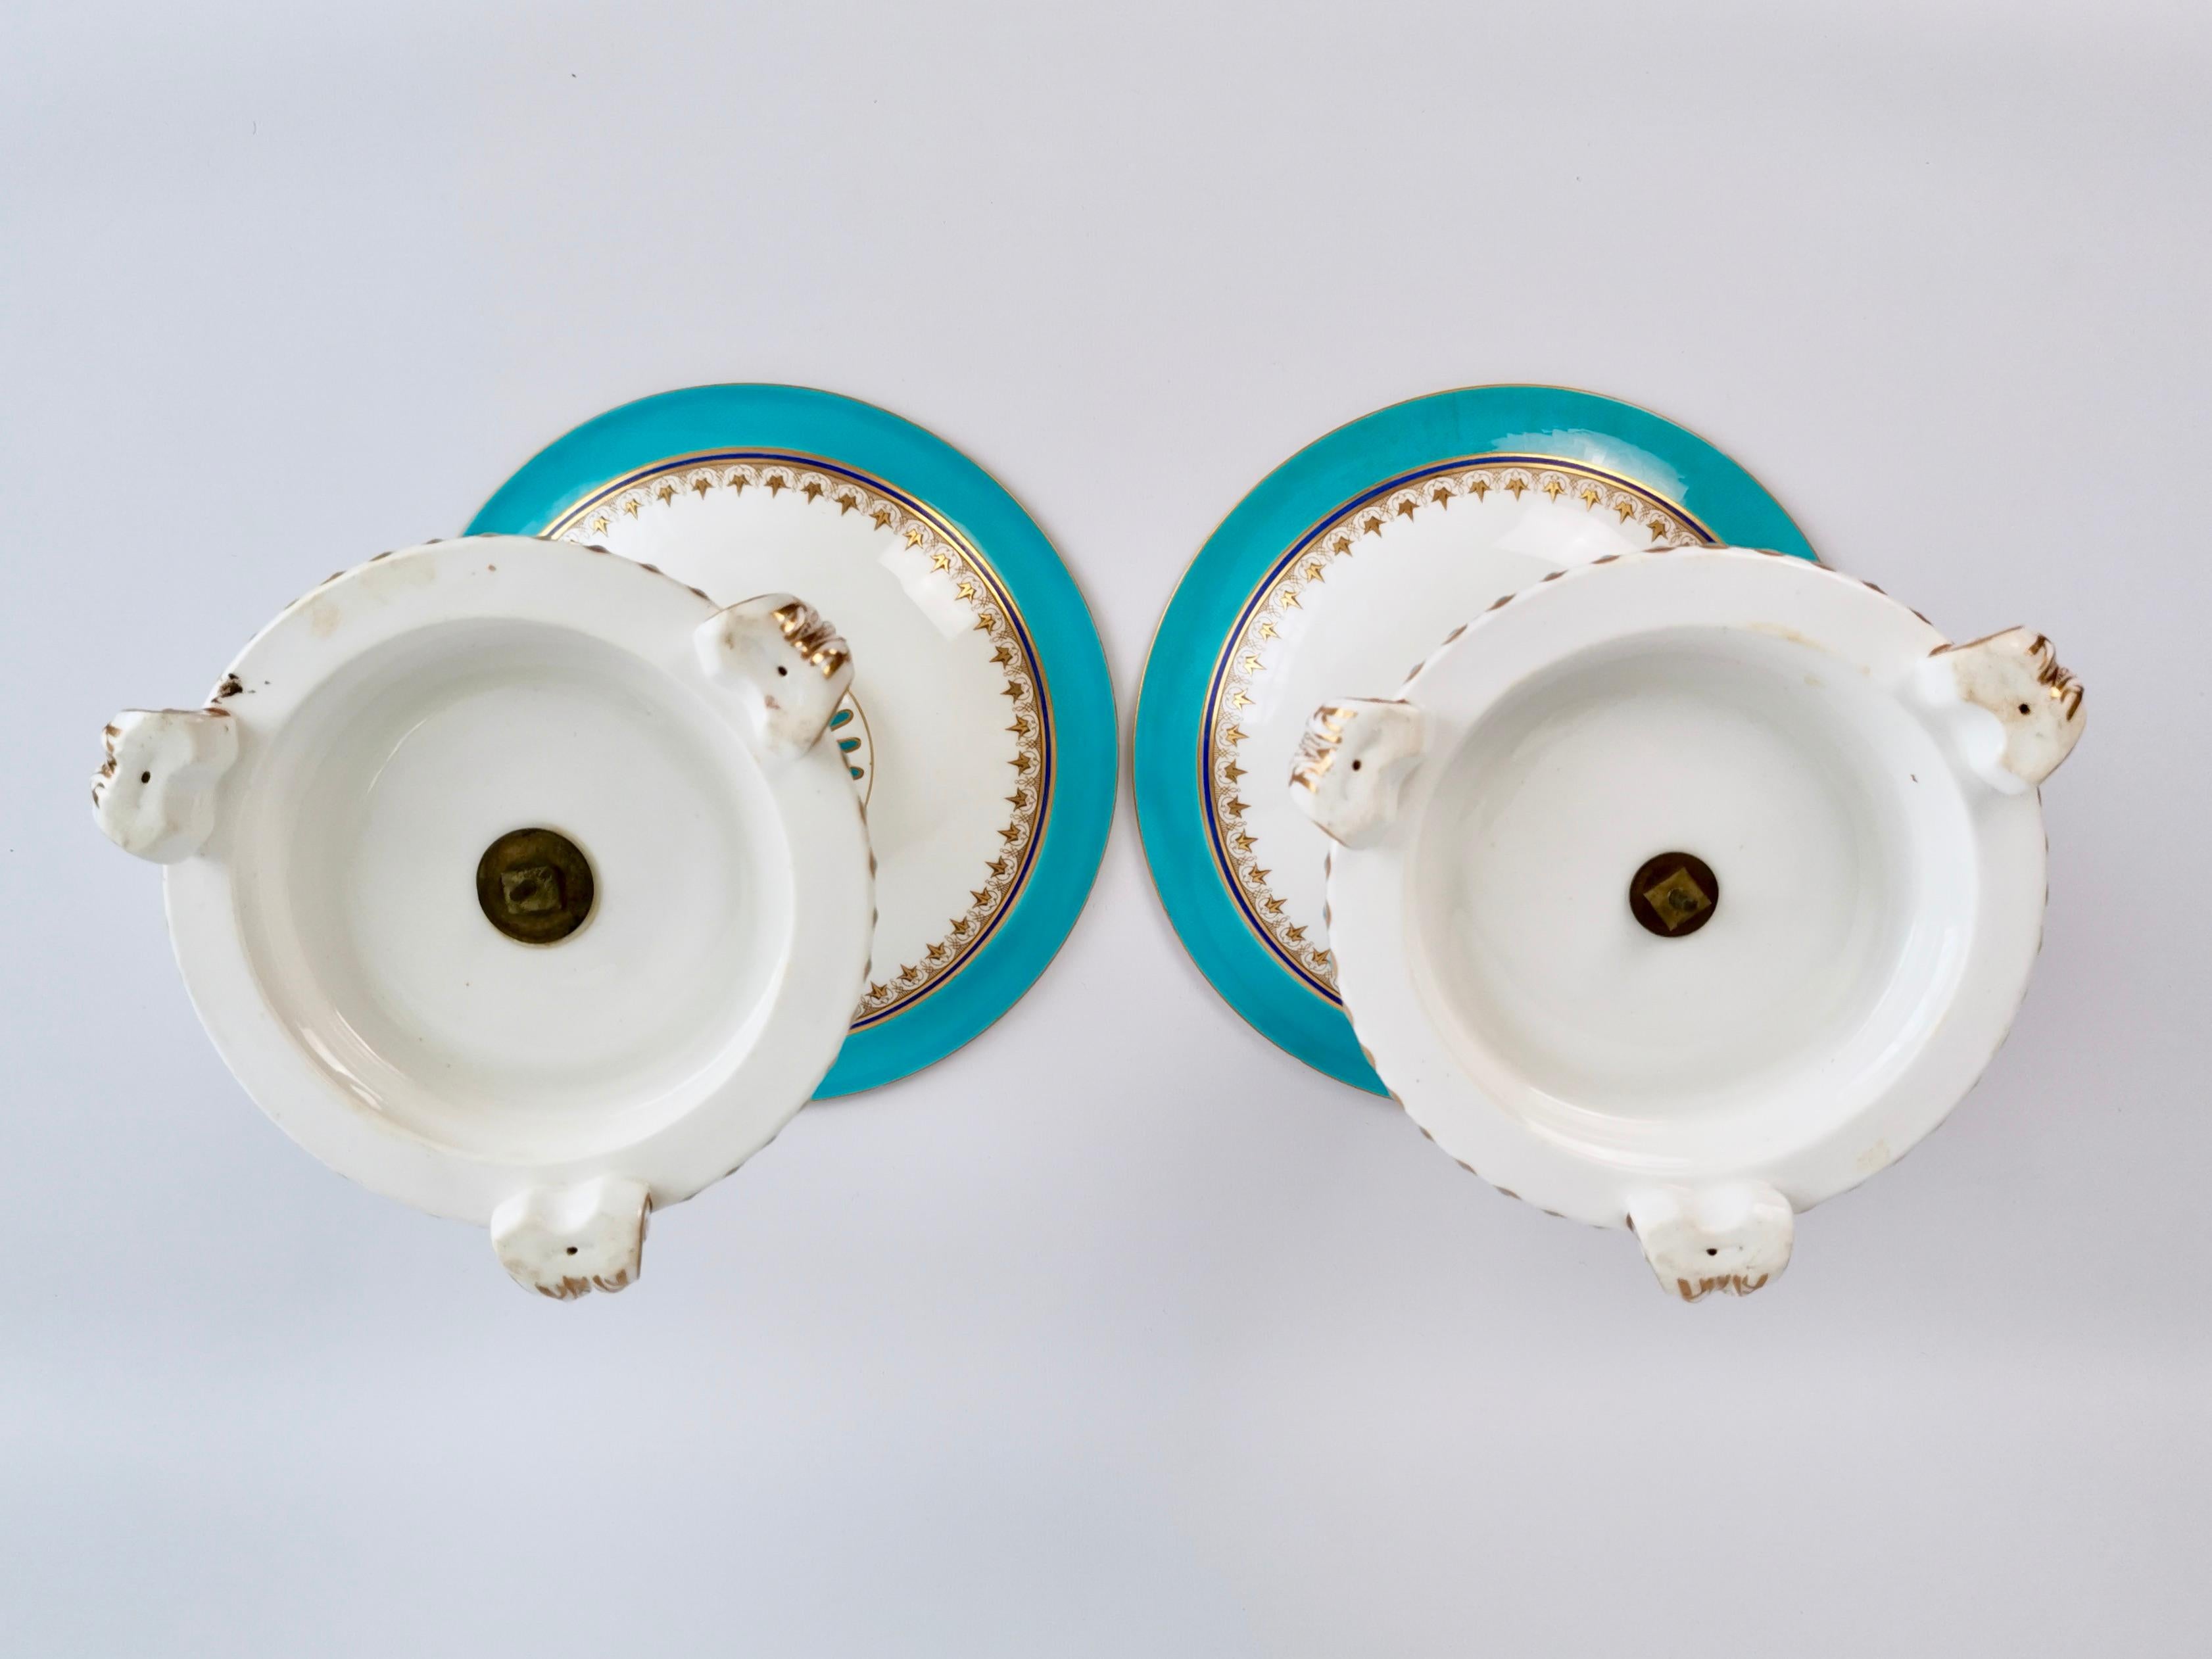 Royal Worcester Porcelain Dessert Service, Turquoise with Parian Cherubs, 1910 12